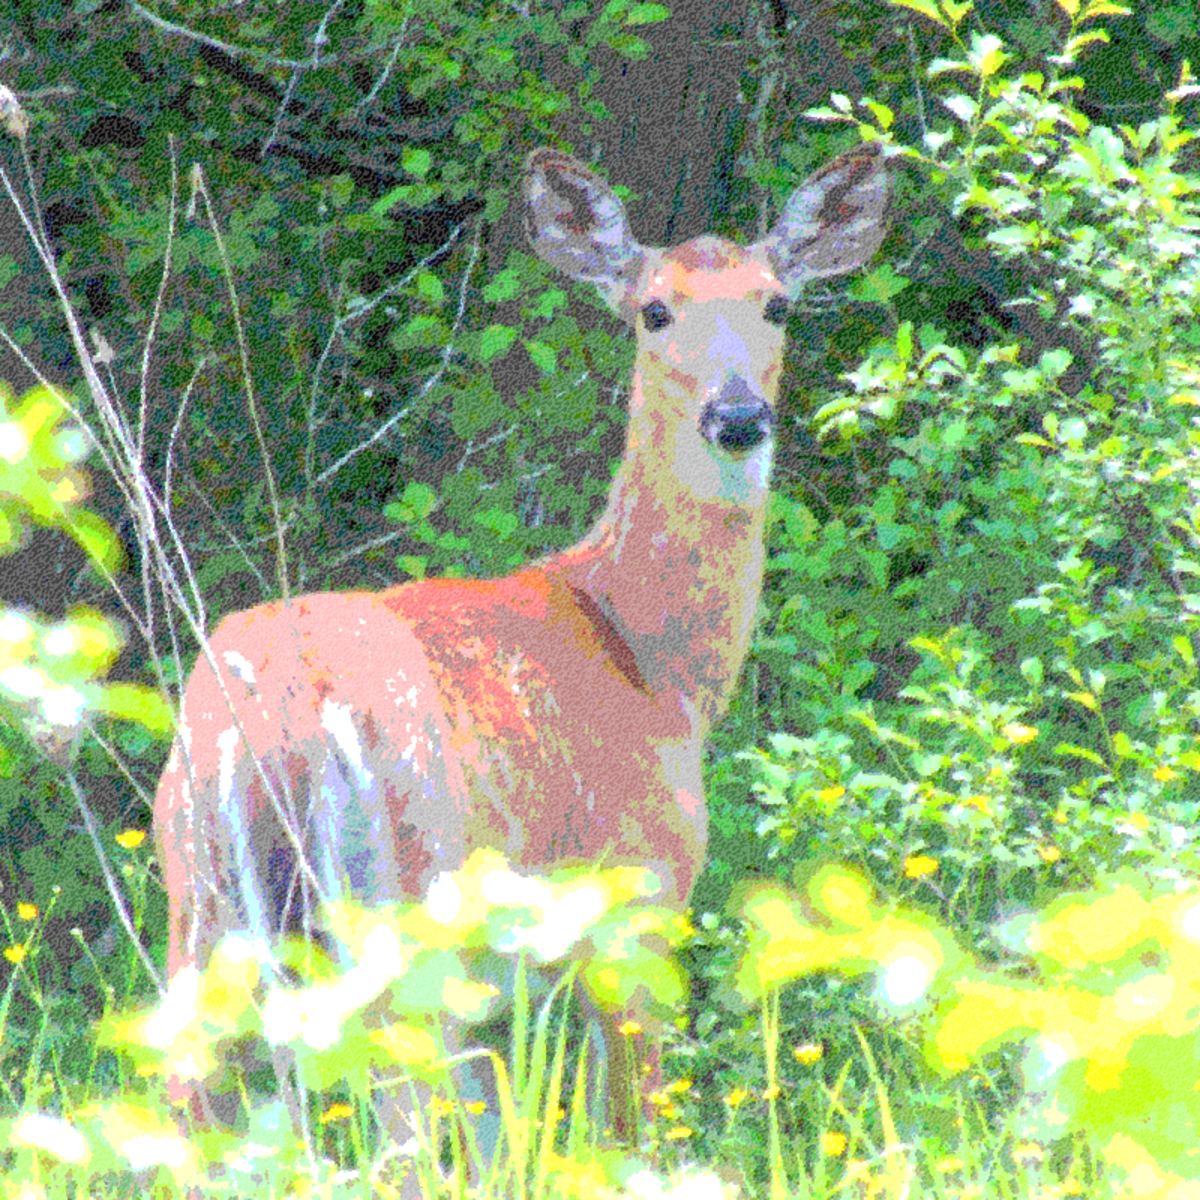 Simple pointillism art from a deer photo. Uses the primary colors plus green.